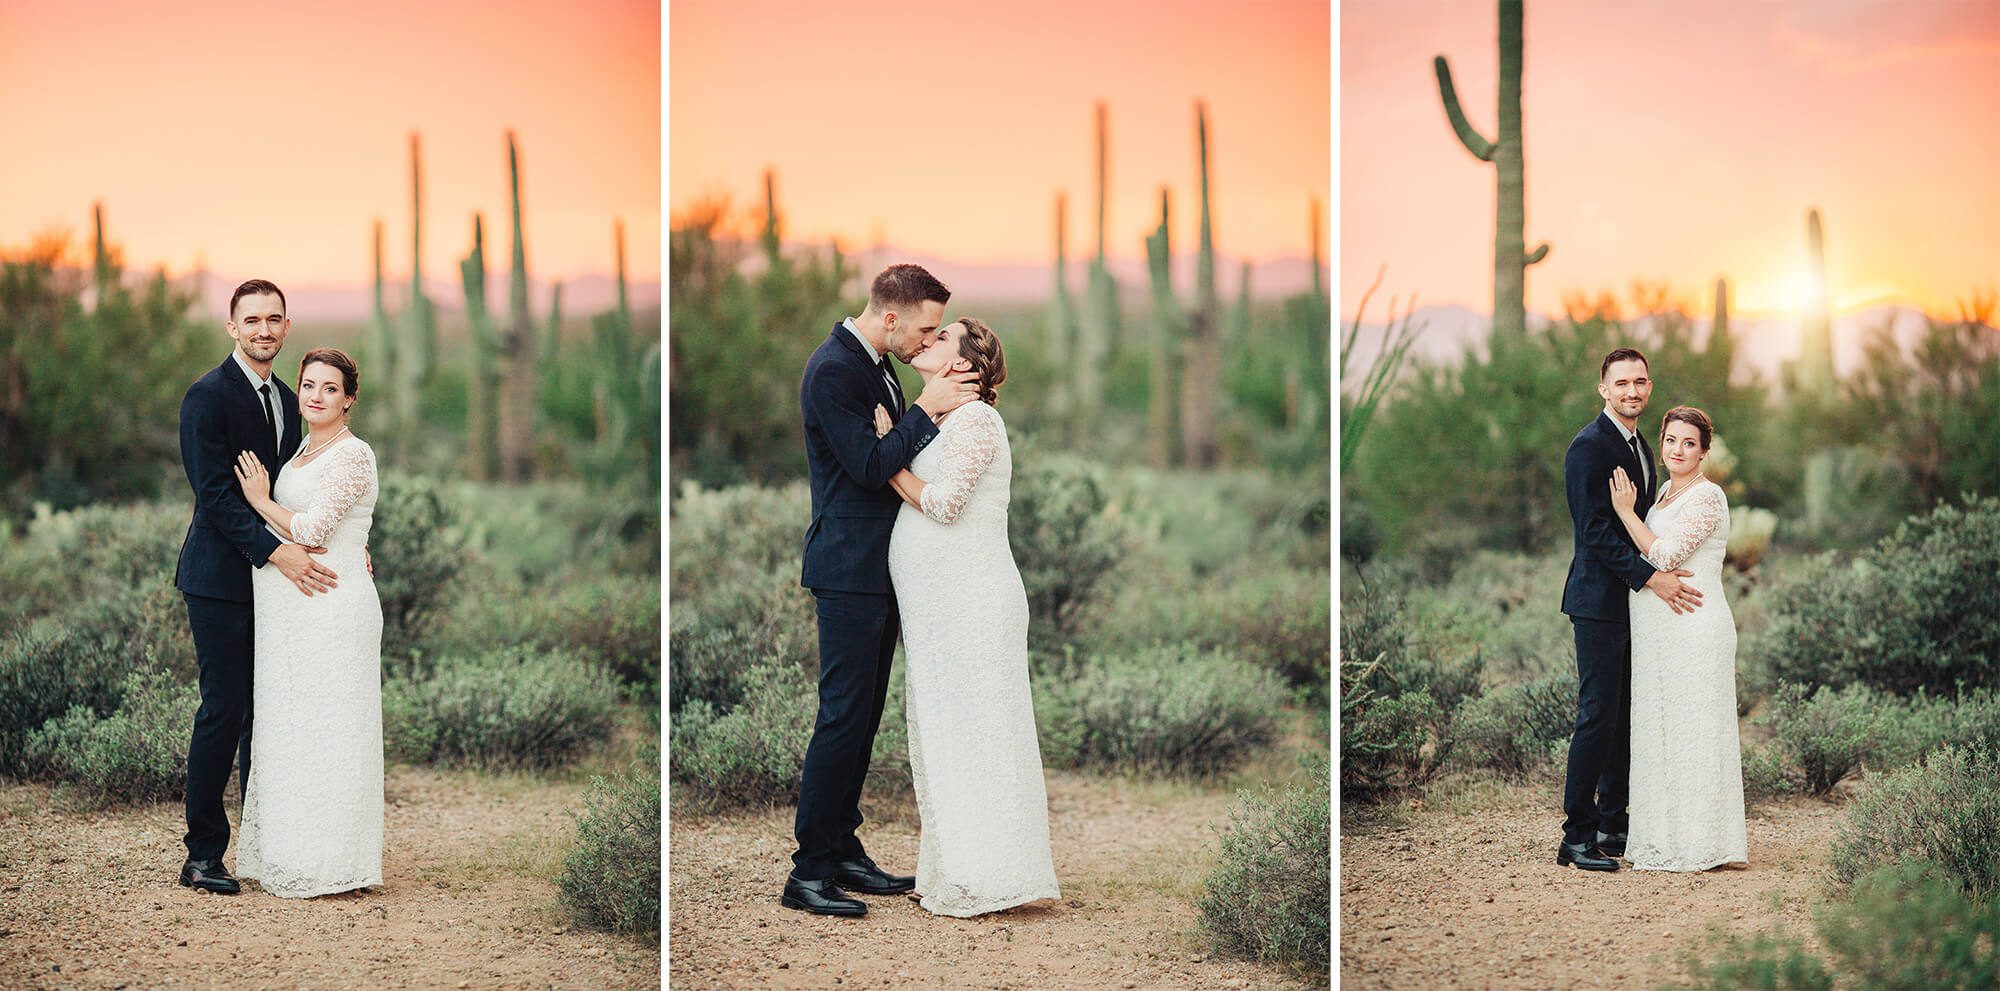 Tucson's sunsets are infamous for their beauty, and this one didn't disappoint. Kenneth and Amanda had an amazing sunset for their elopement.